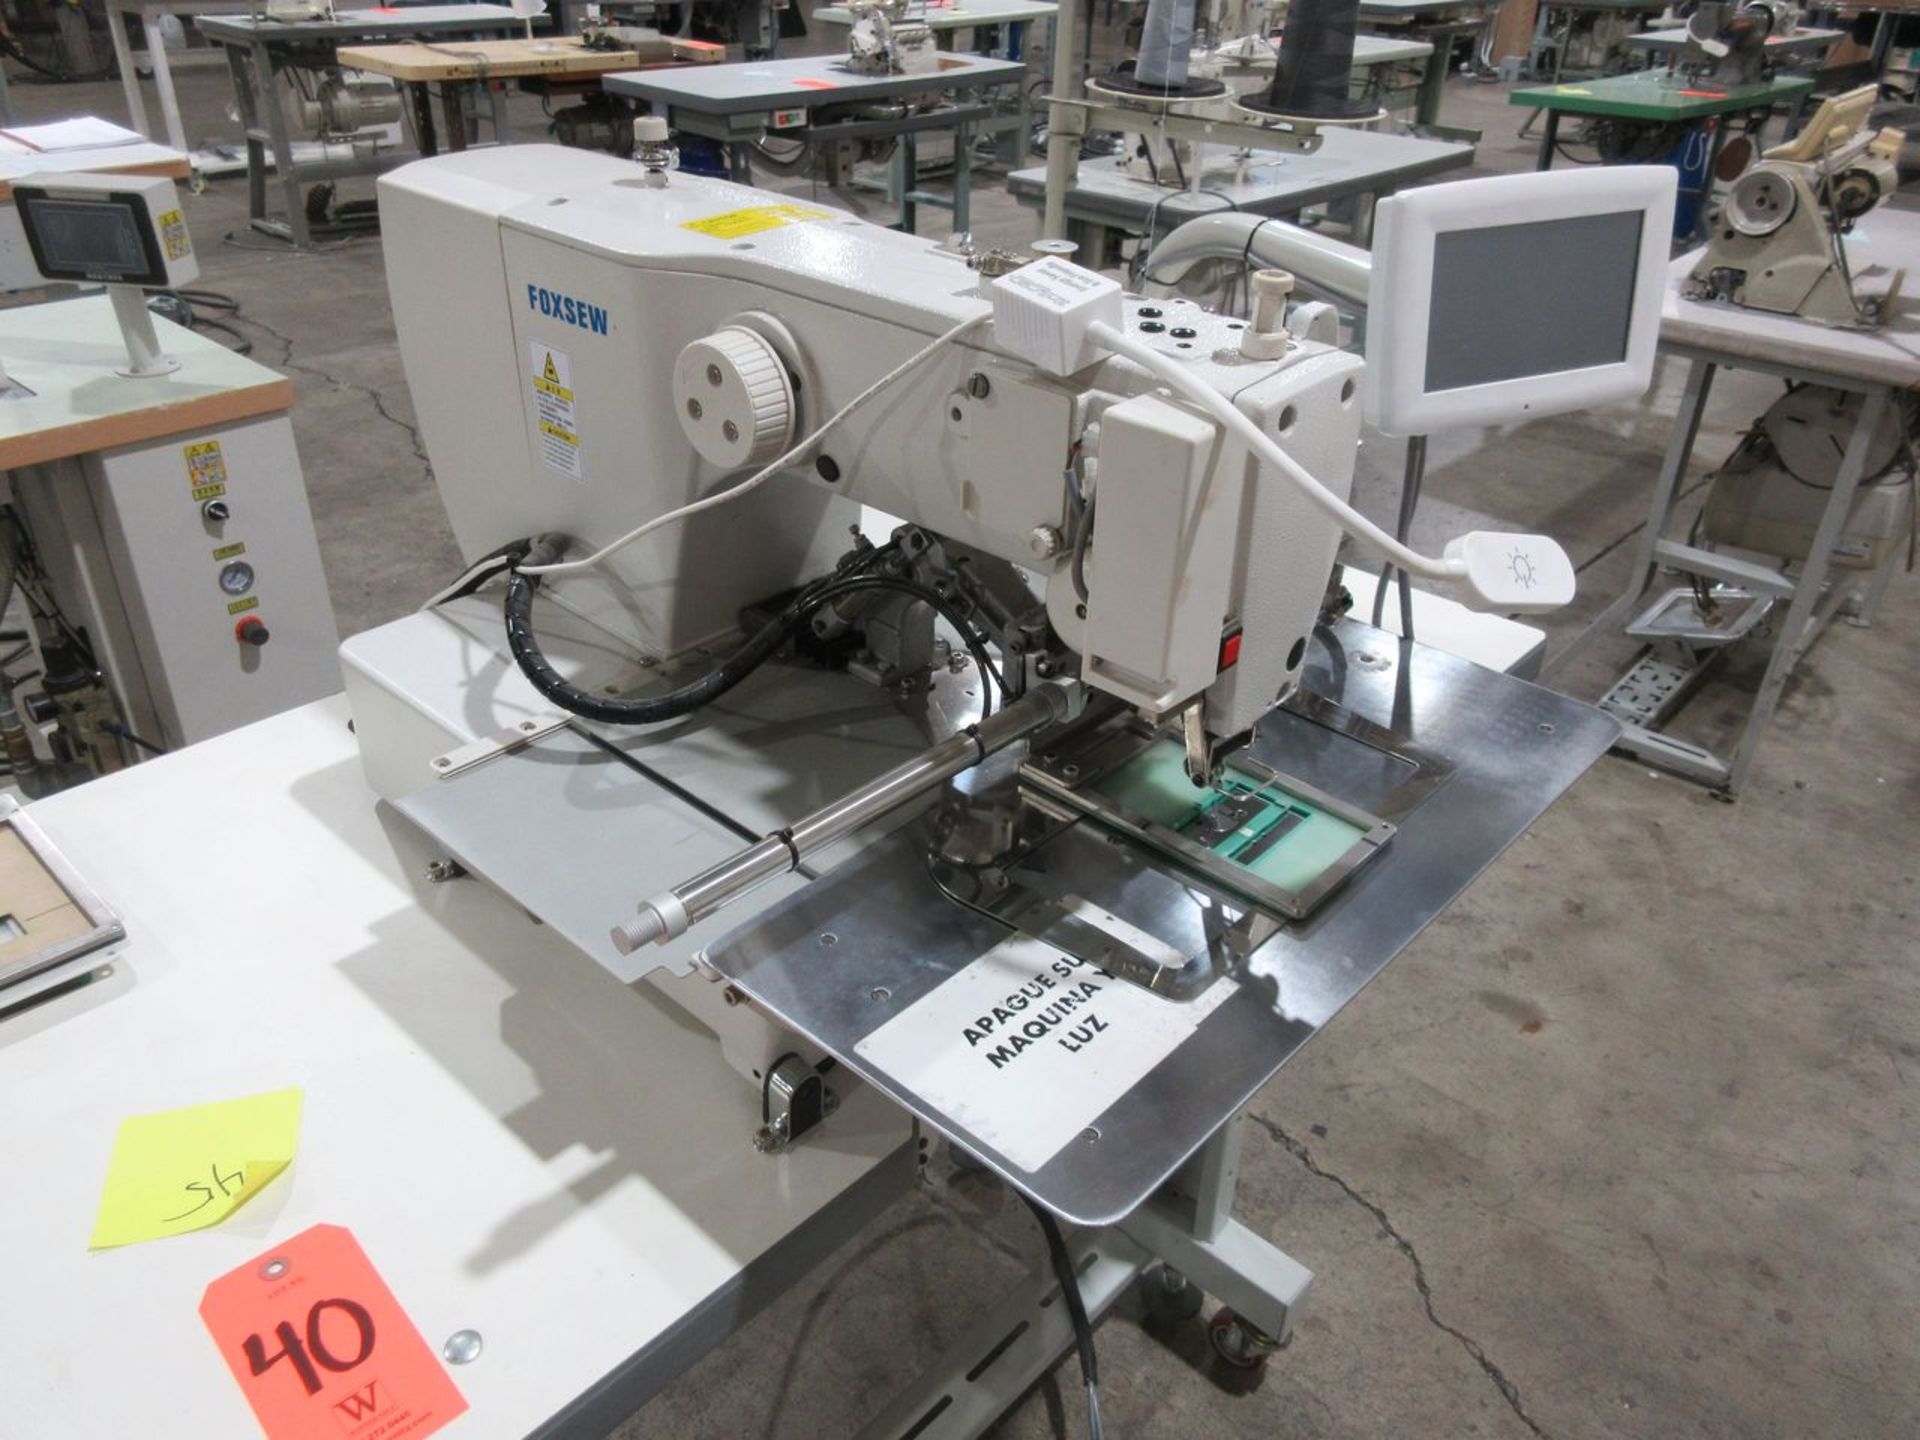 Foxsew Model FX2210-1-1 Automatic Pattern Sewing Machine, S/N: 20180715; with Touch Screen - Image 2 of 5